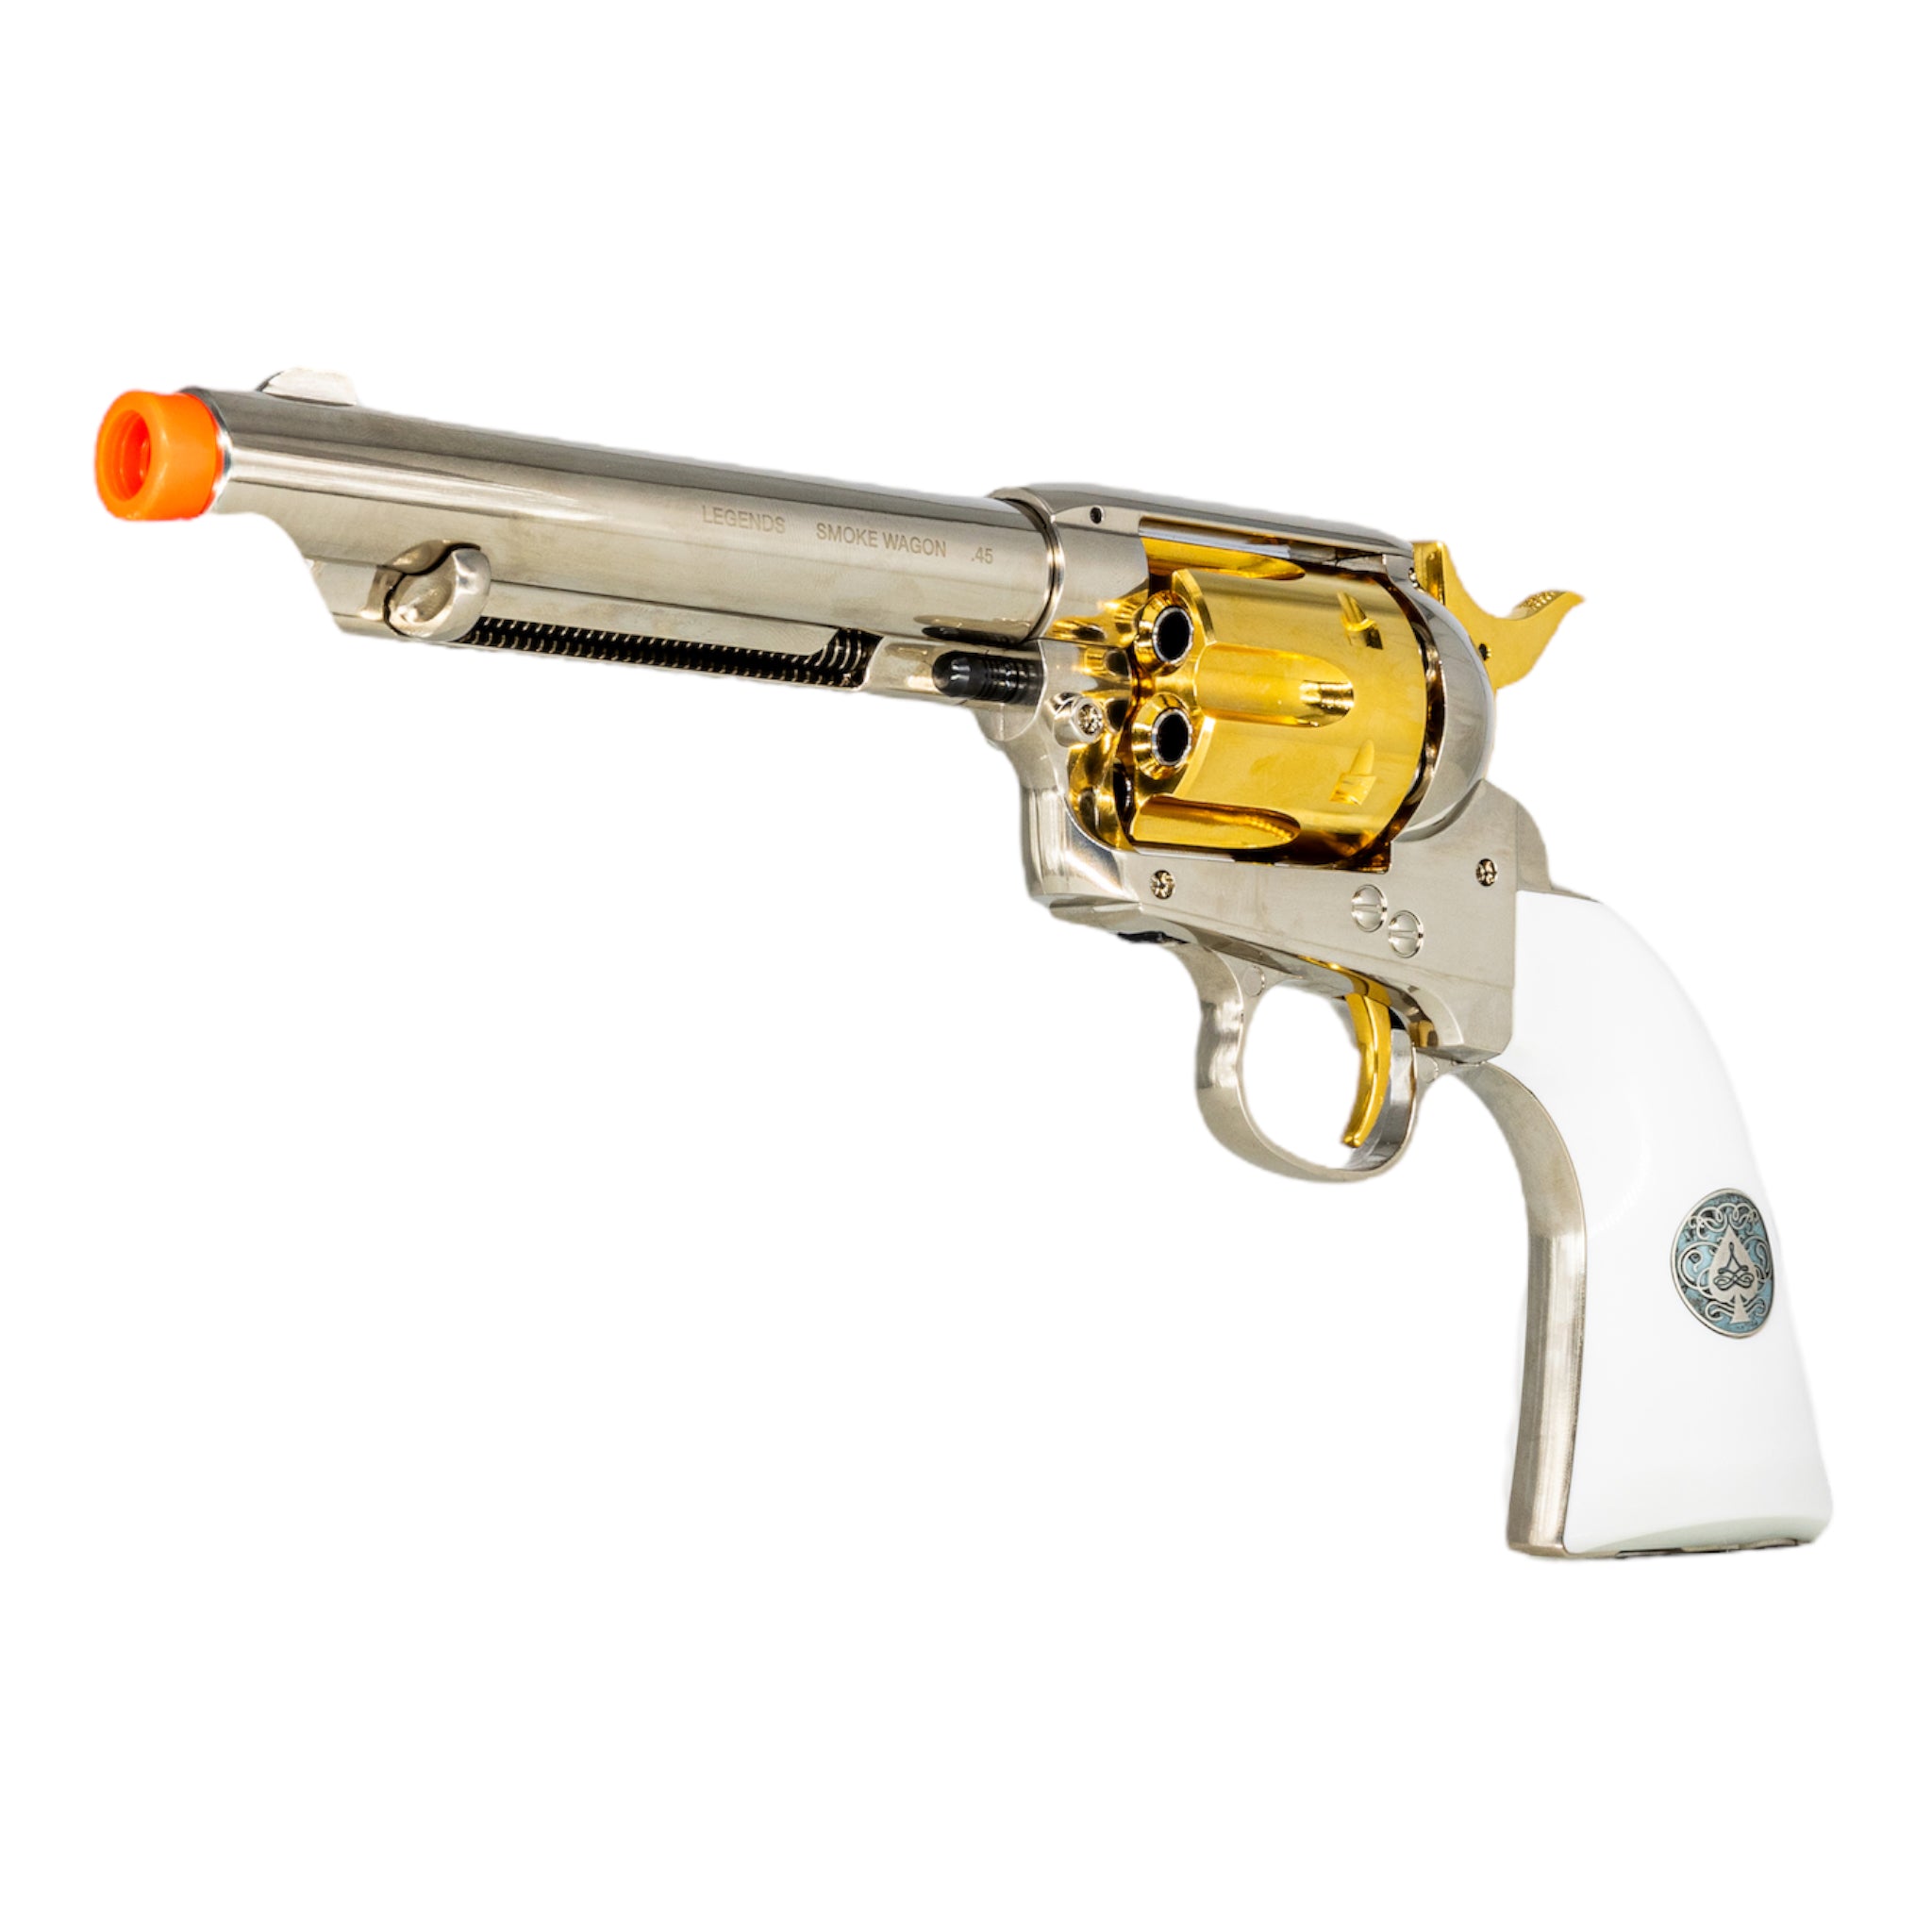 Legends Smokewagon CO2 Airsoft Revolver [Limited Edition] (Nickel/Gold) - ssairsoft.com